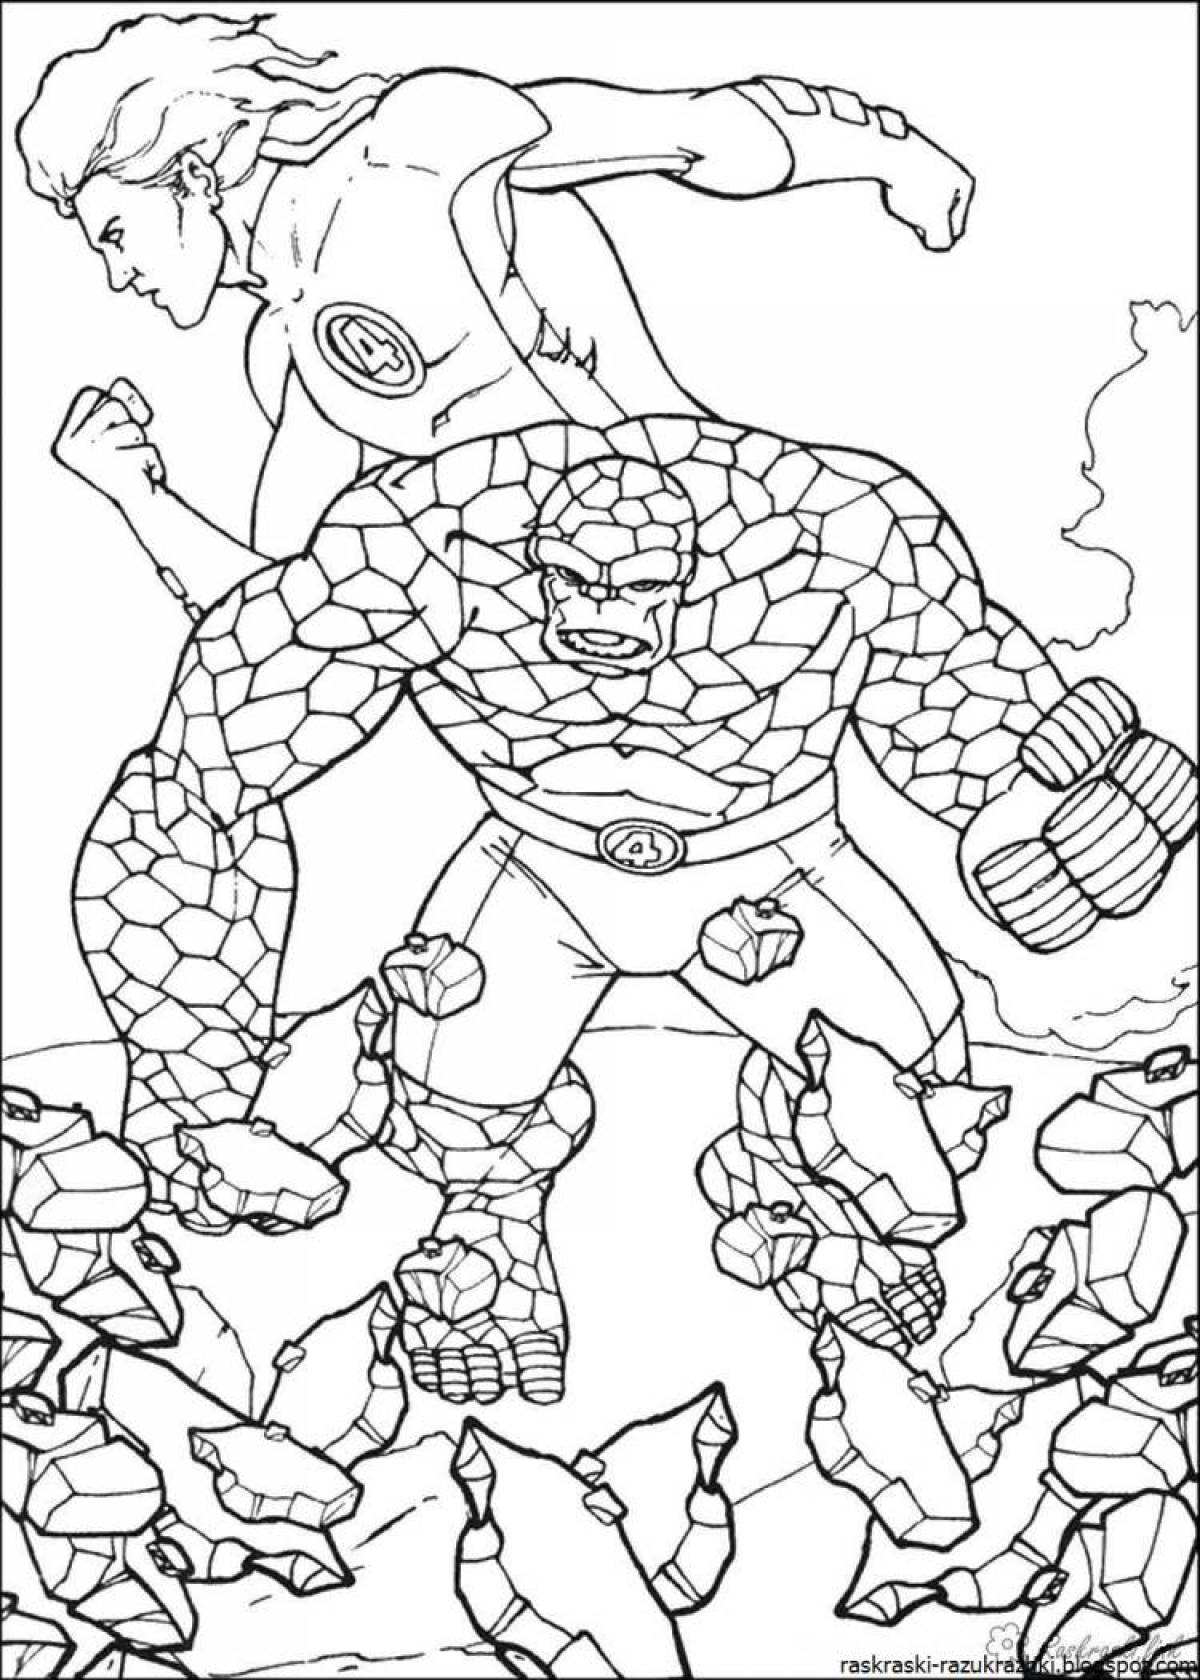 Fabulous superhero coloring pages for boys